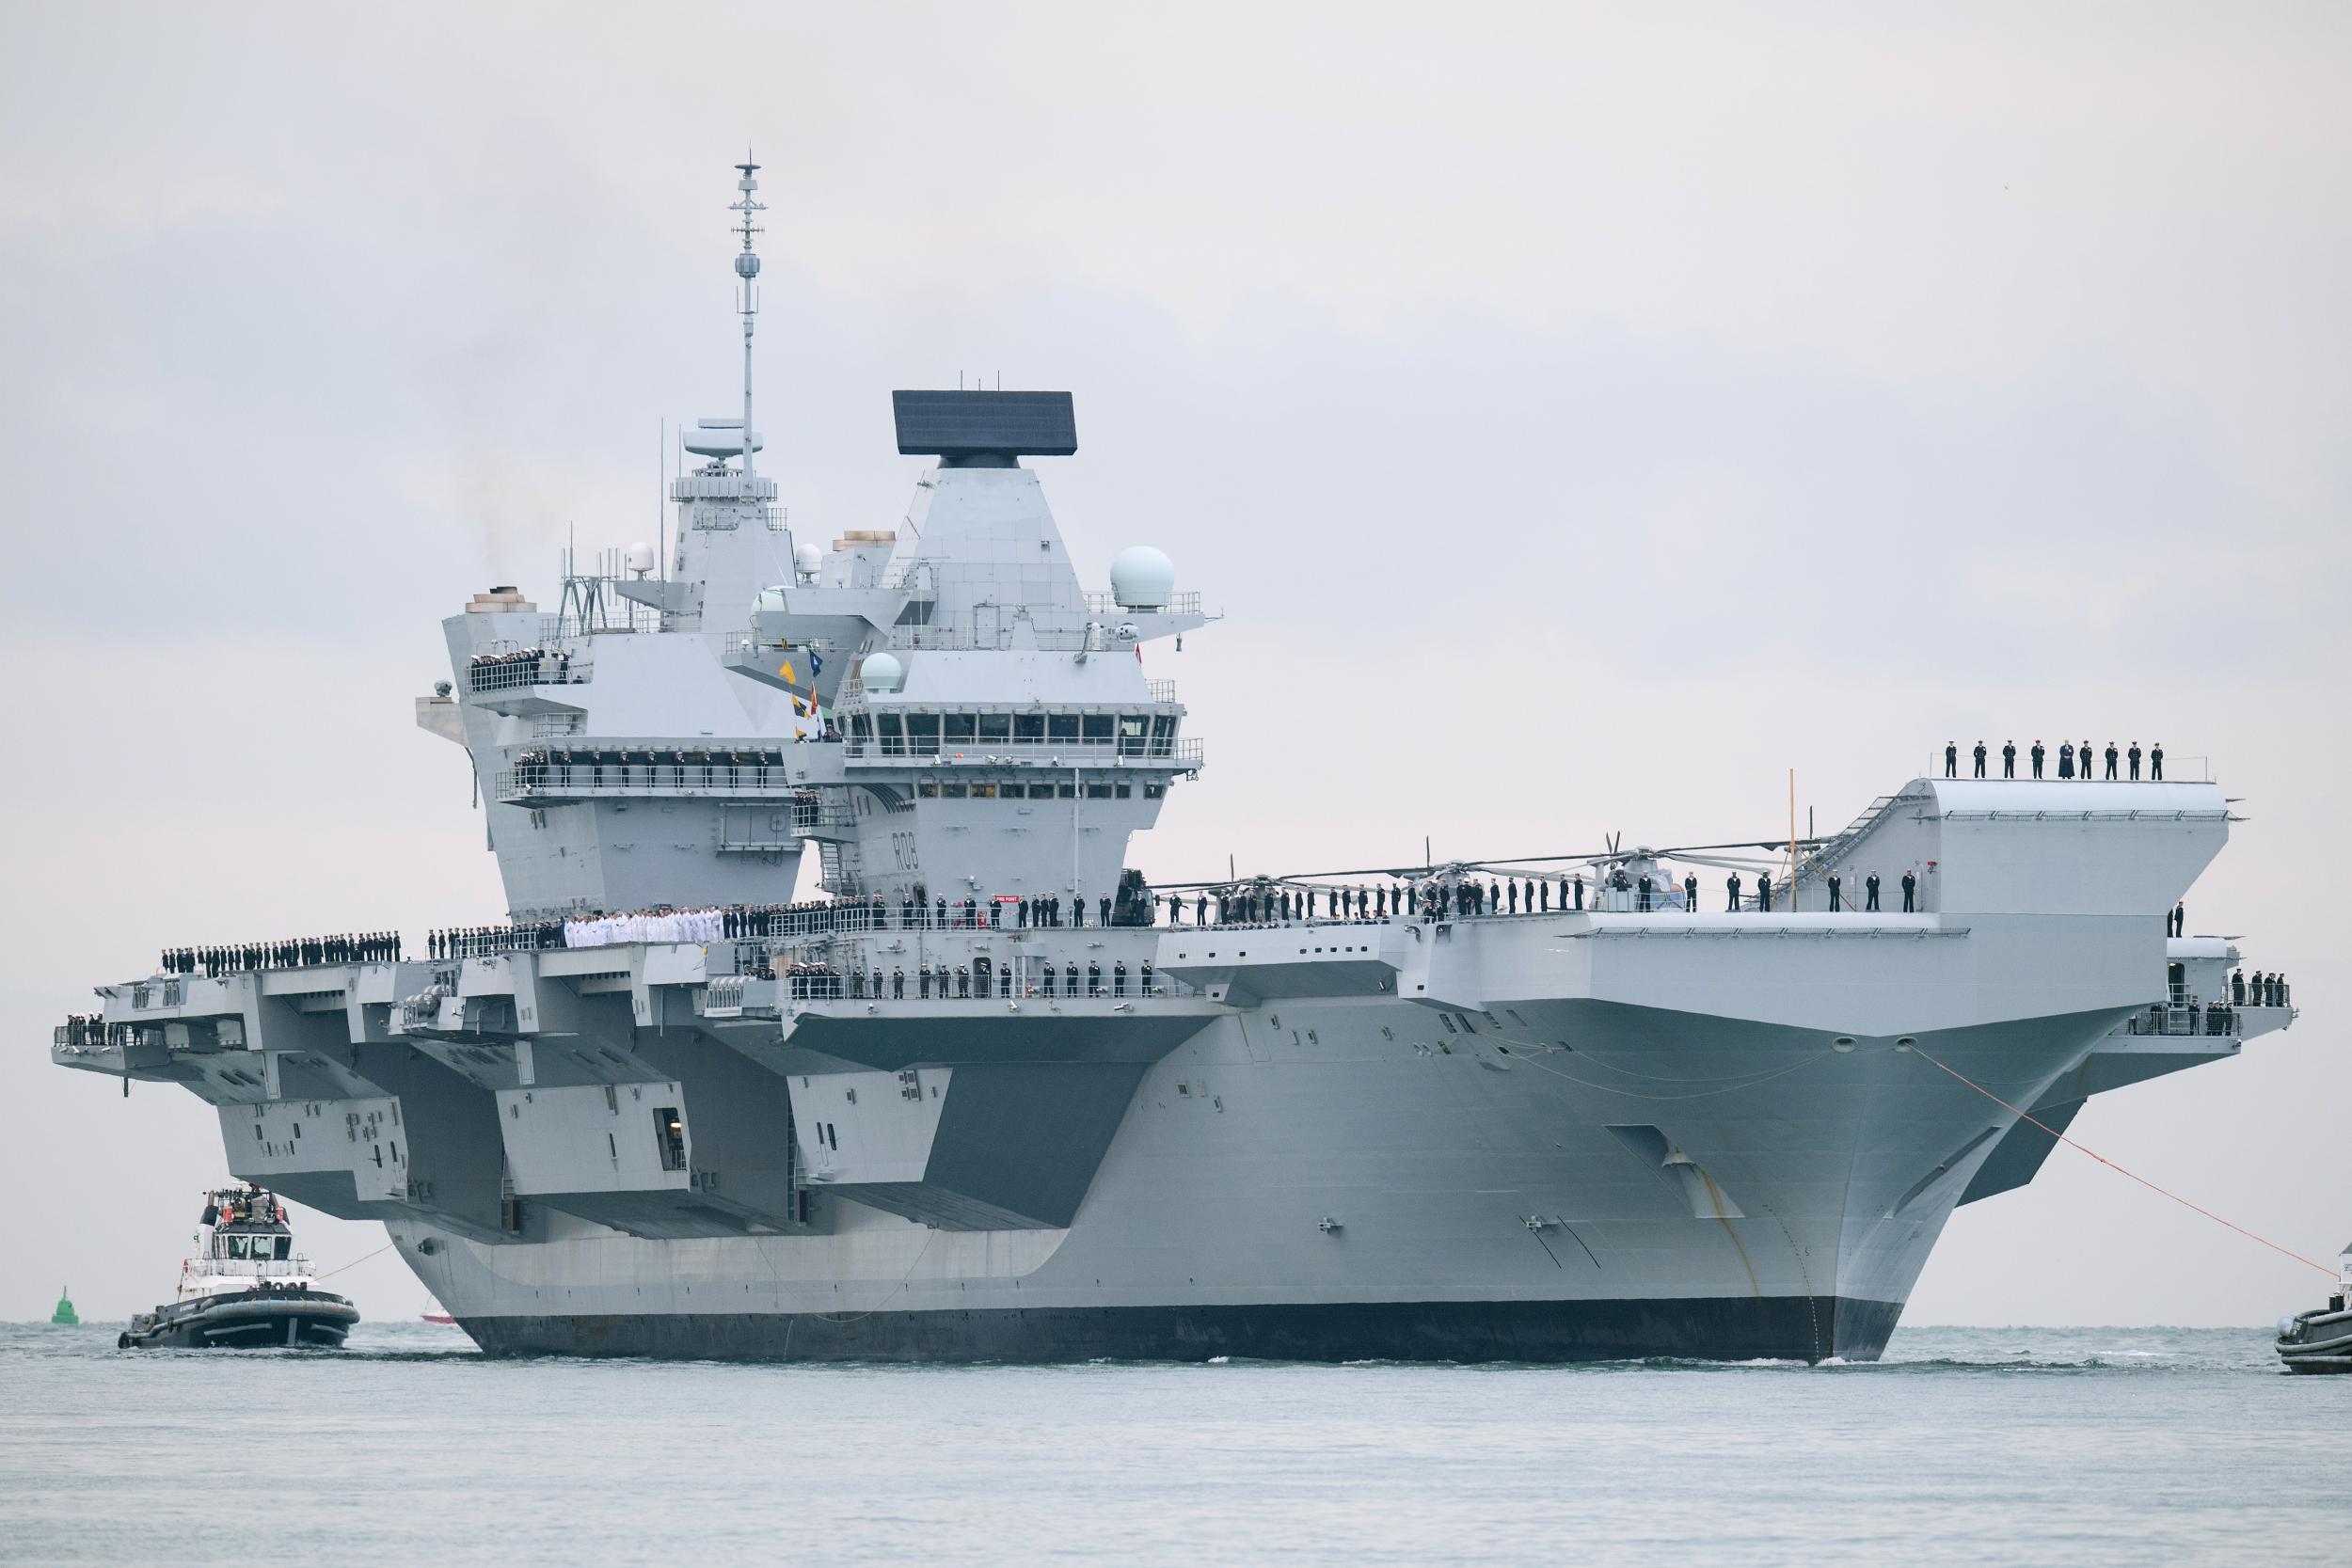 Ships that service warships like the HMS Queen Elizabeth super carrier can be be built overseas